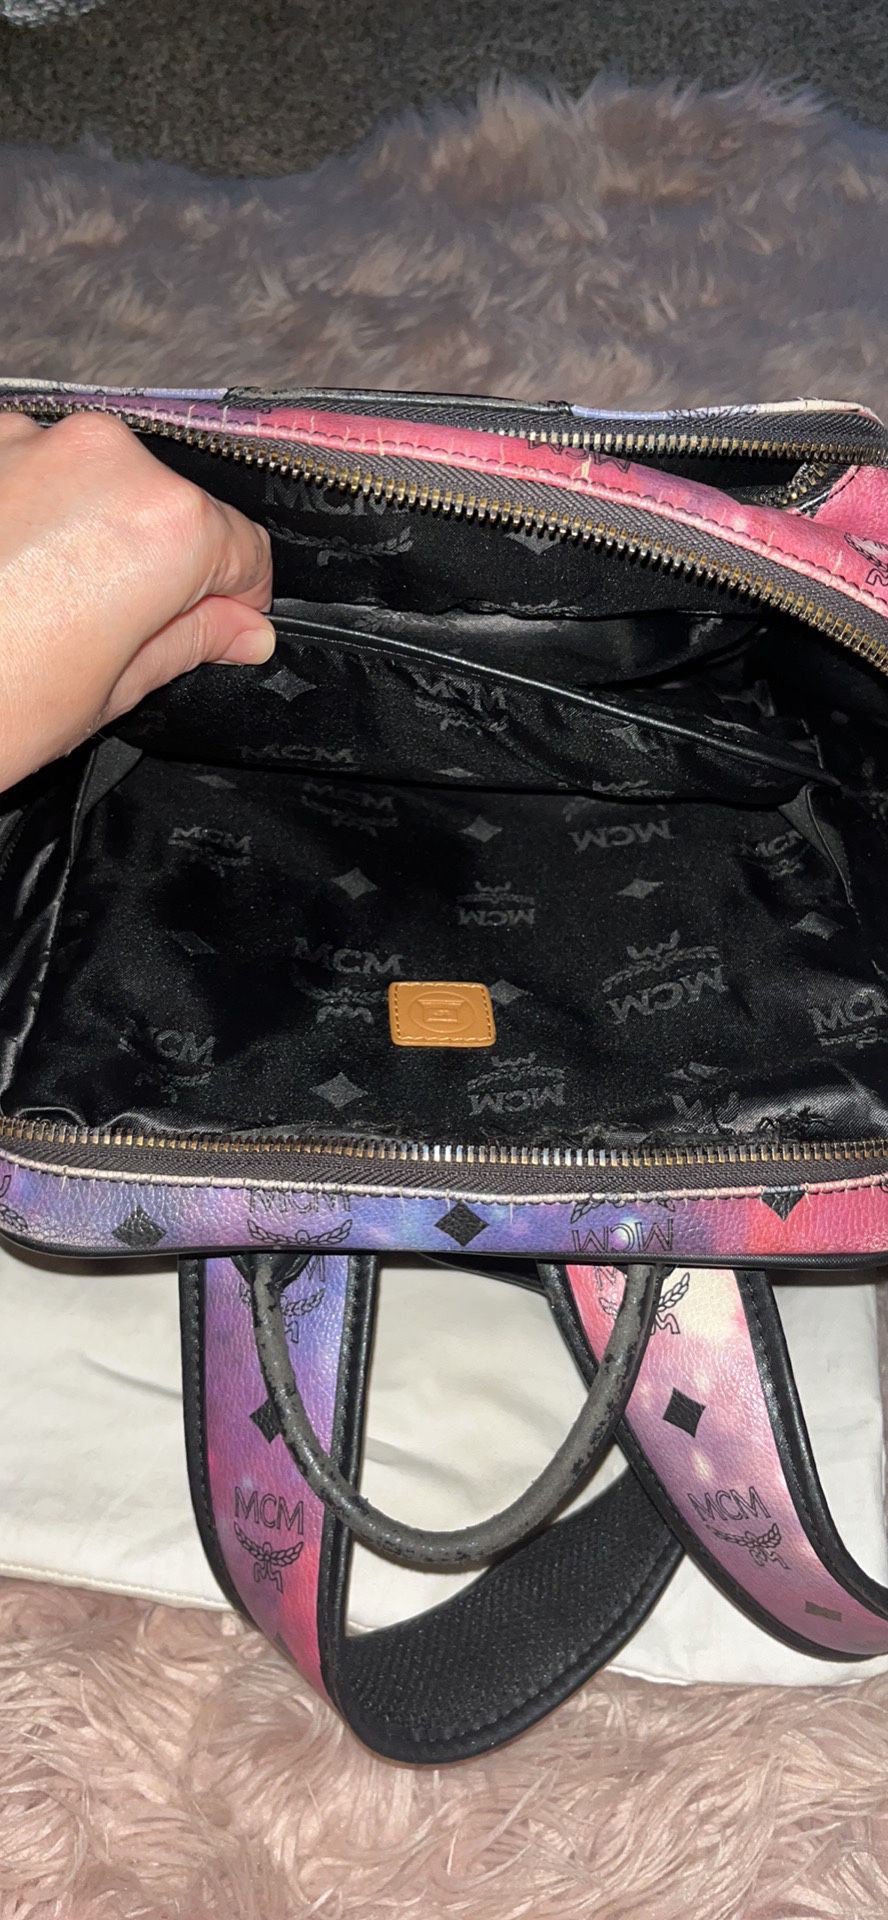 Girls Pink MCM Backpack (AUTHENTIC) for Sale in Linda, CA